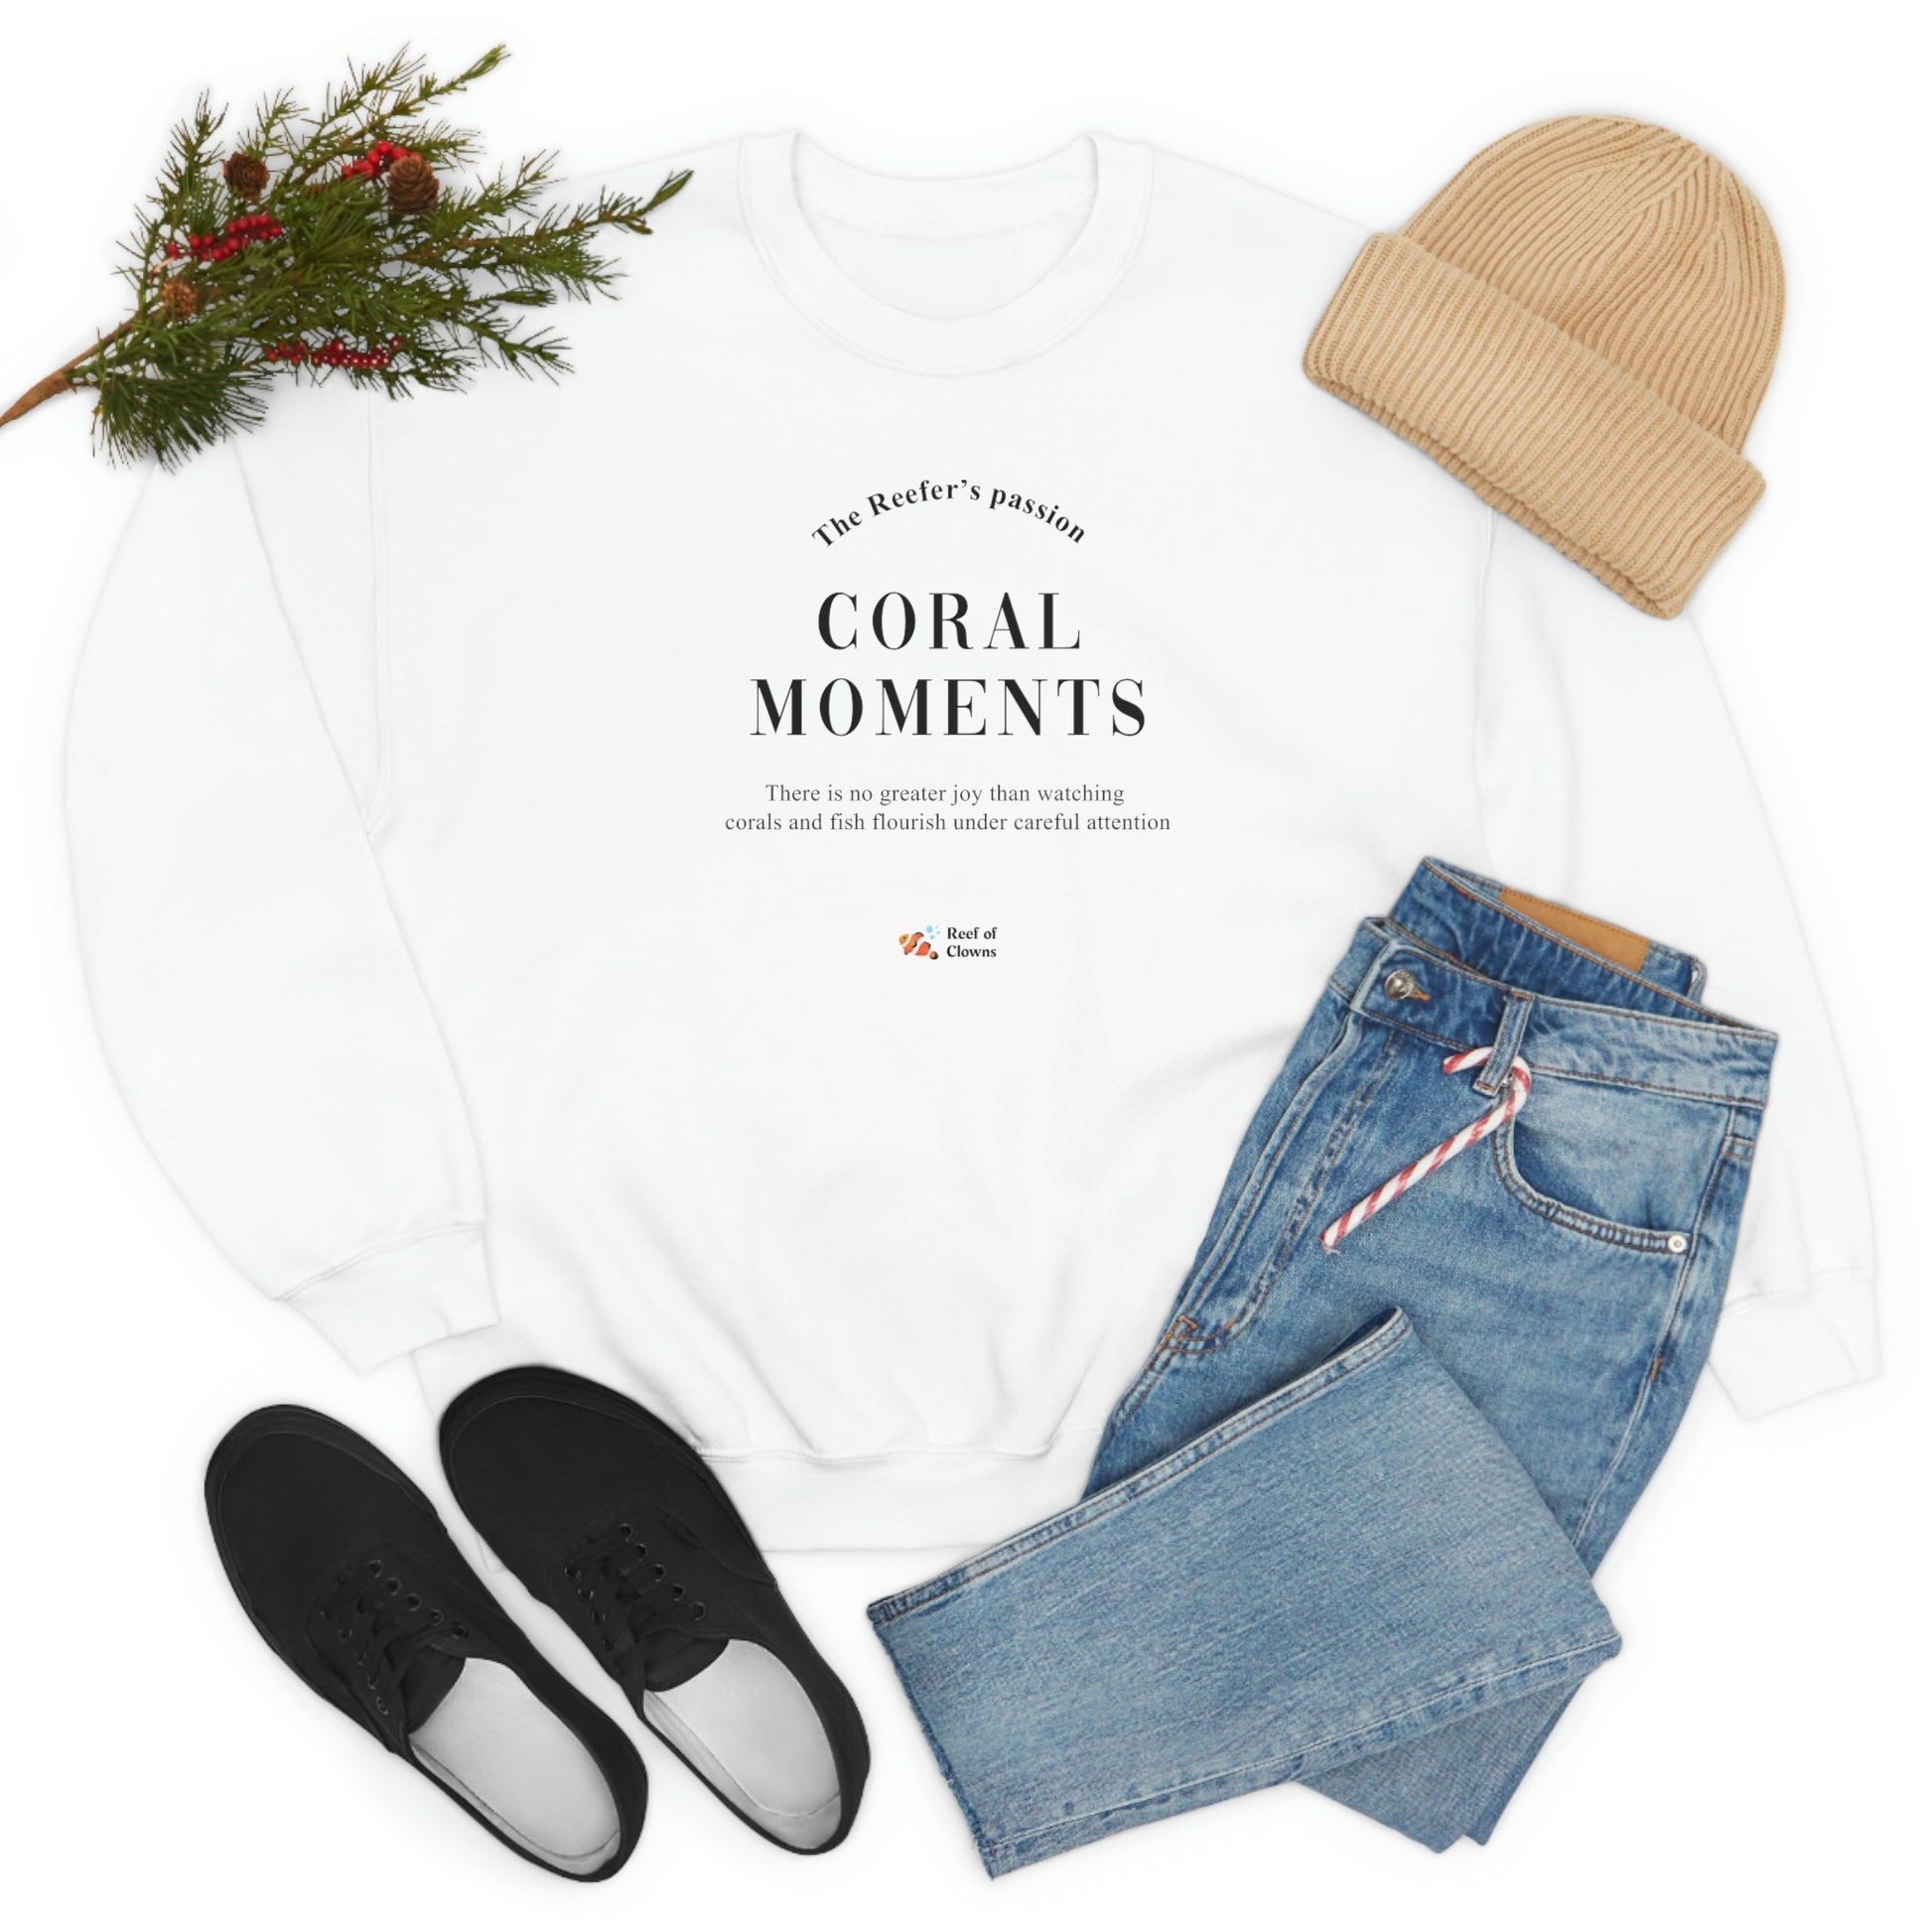 Coral Moments - Reef of Clowns